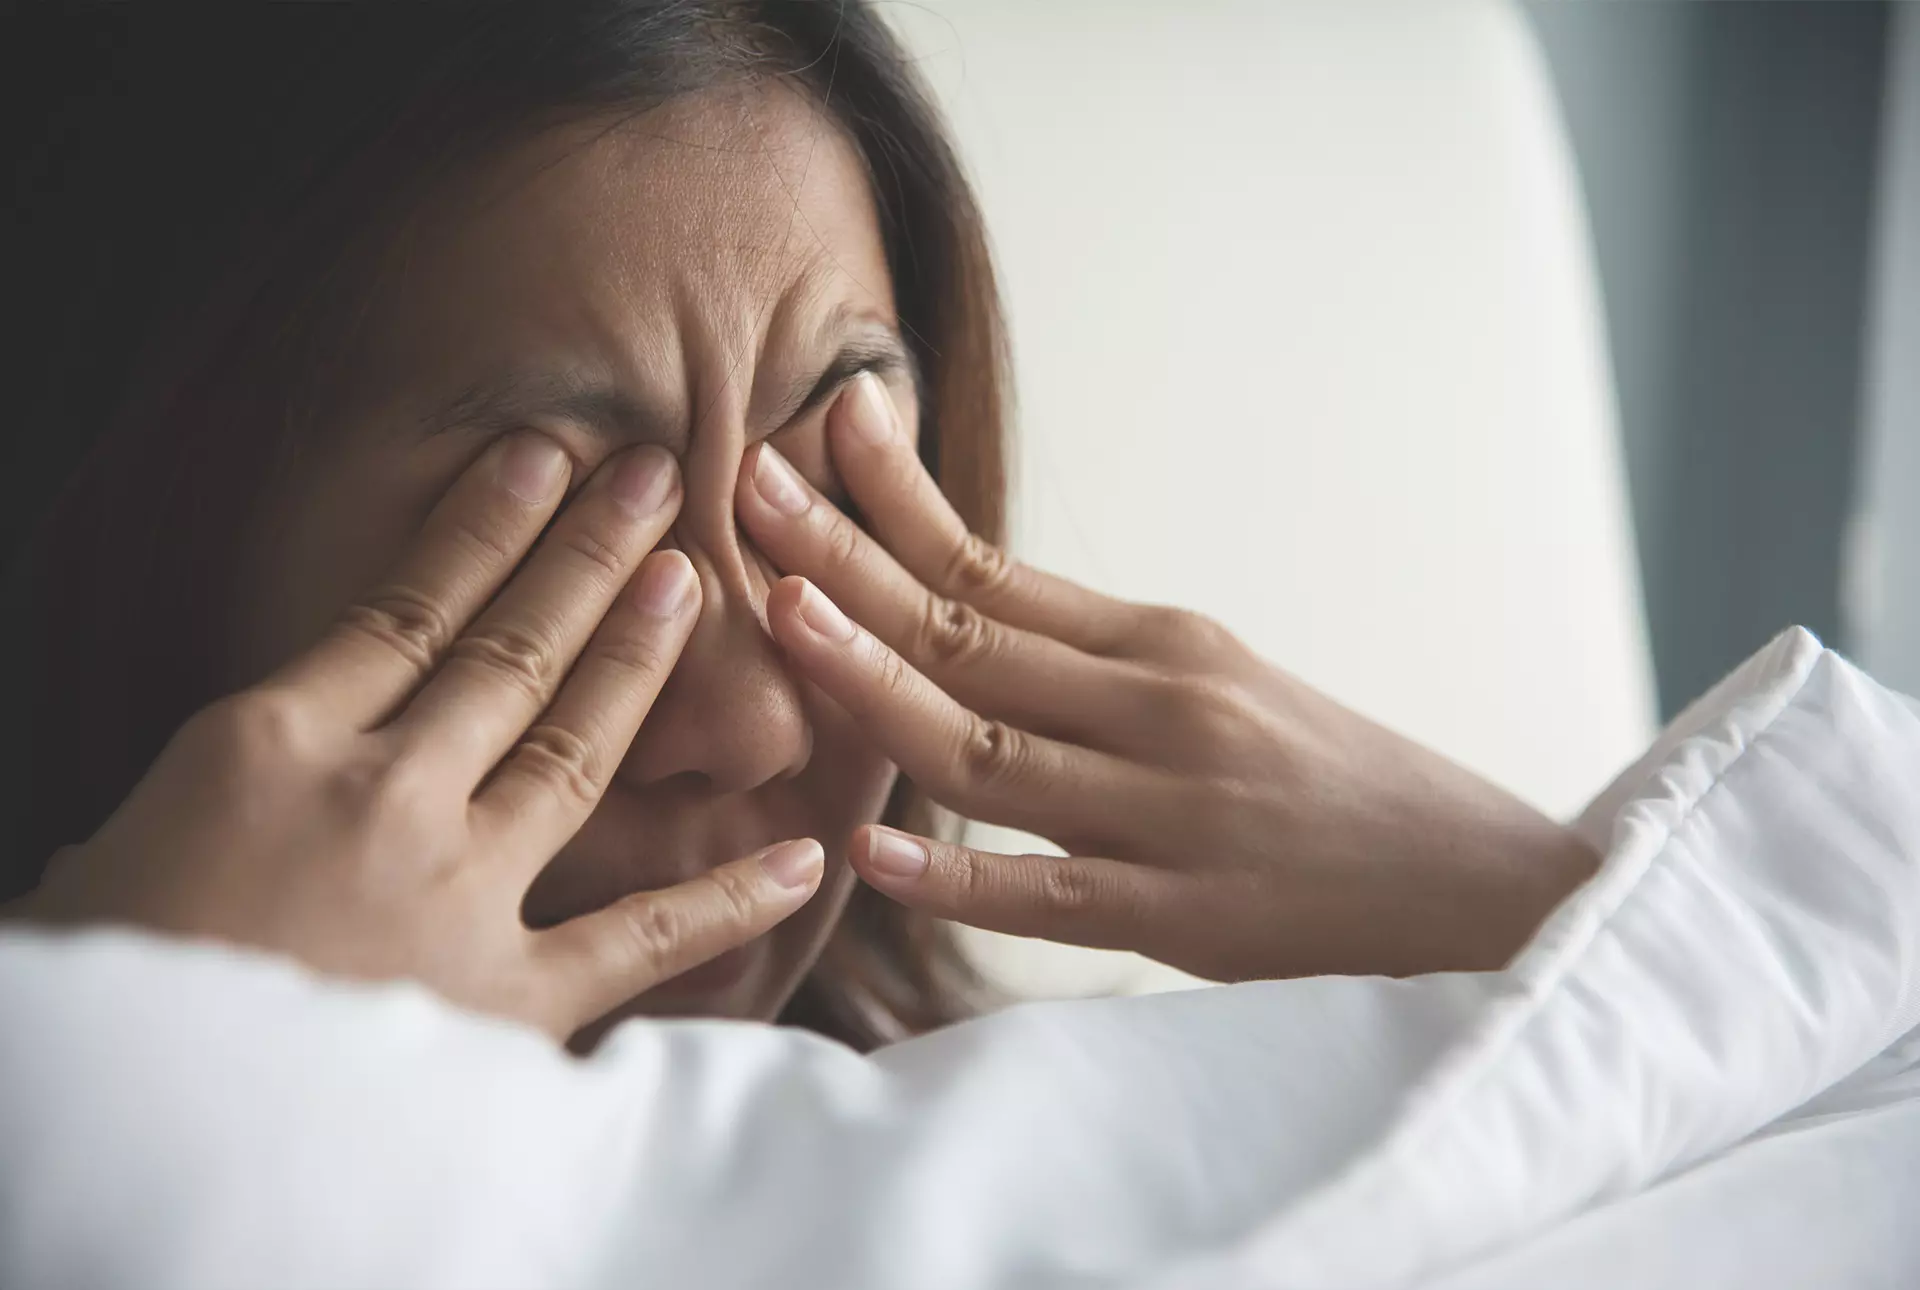 Woman rubbing her eyes can cause astigmatism